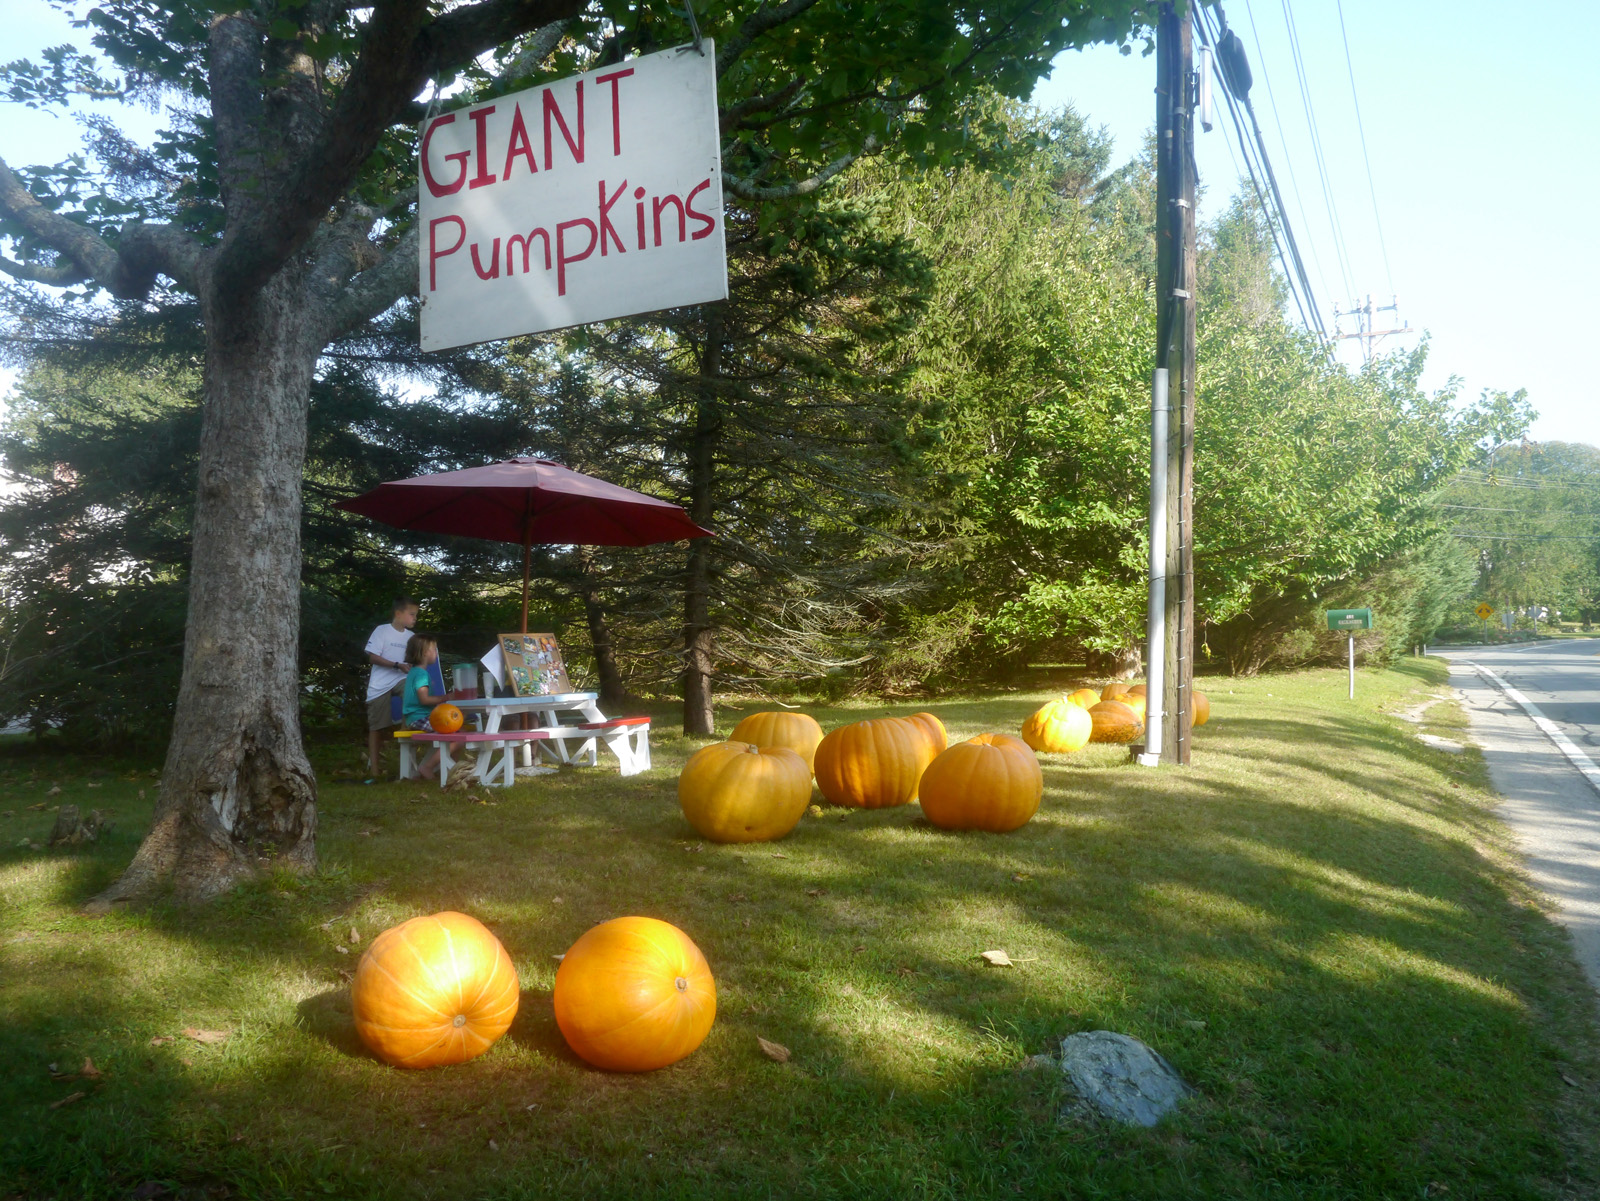 Giant Pumpkins (user submitted)